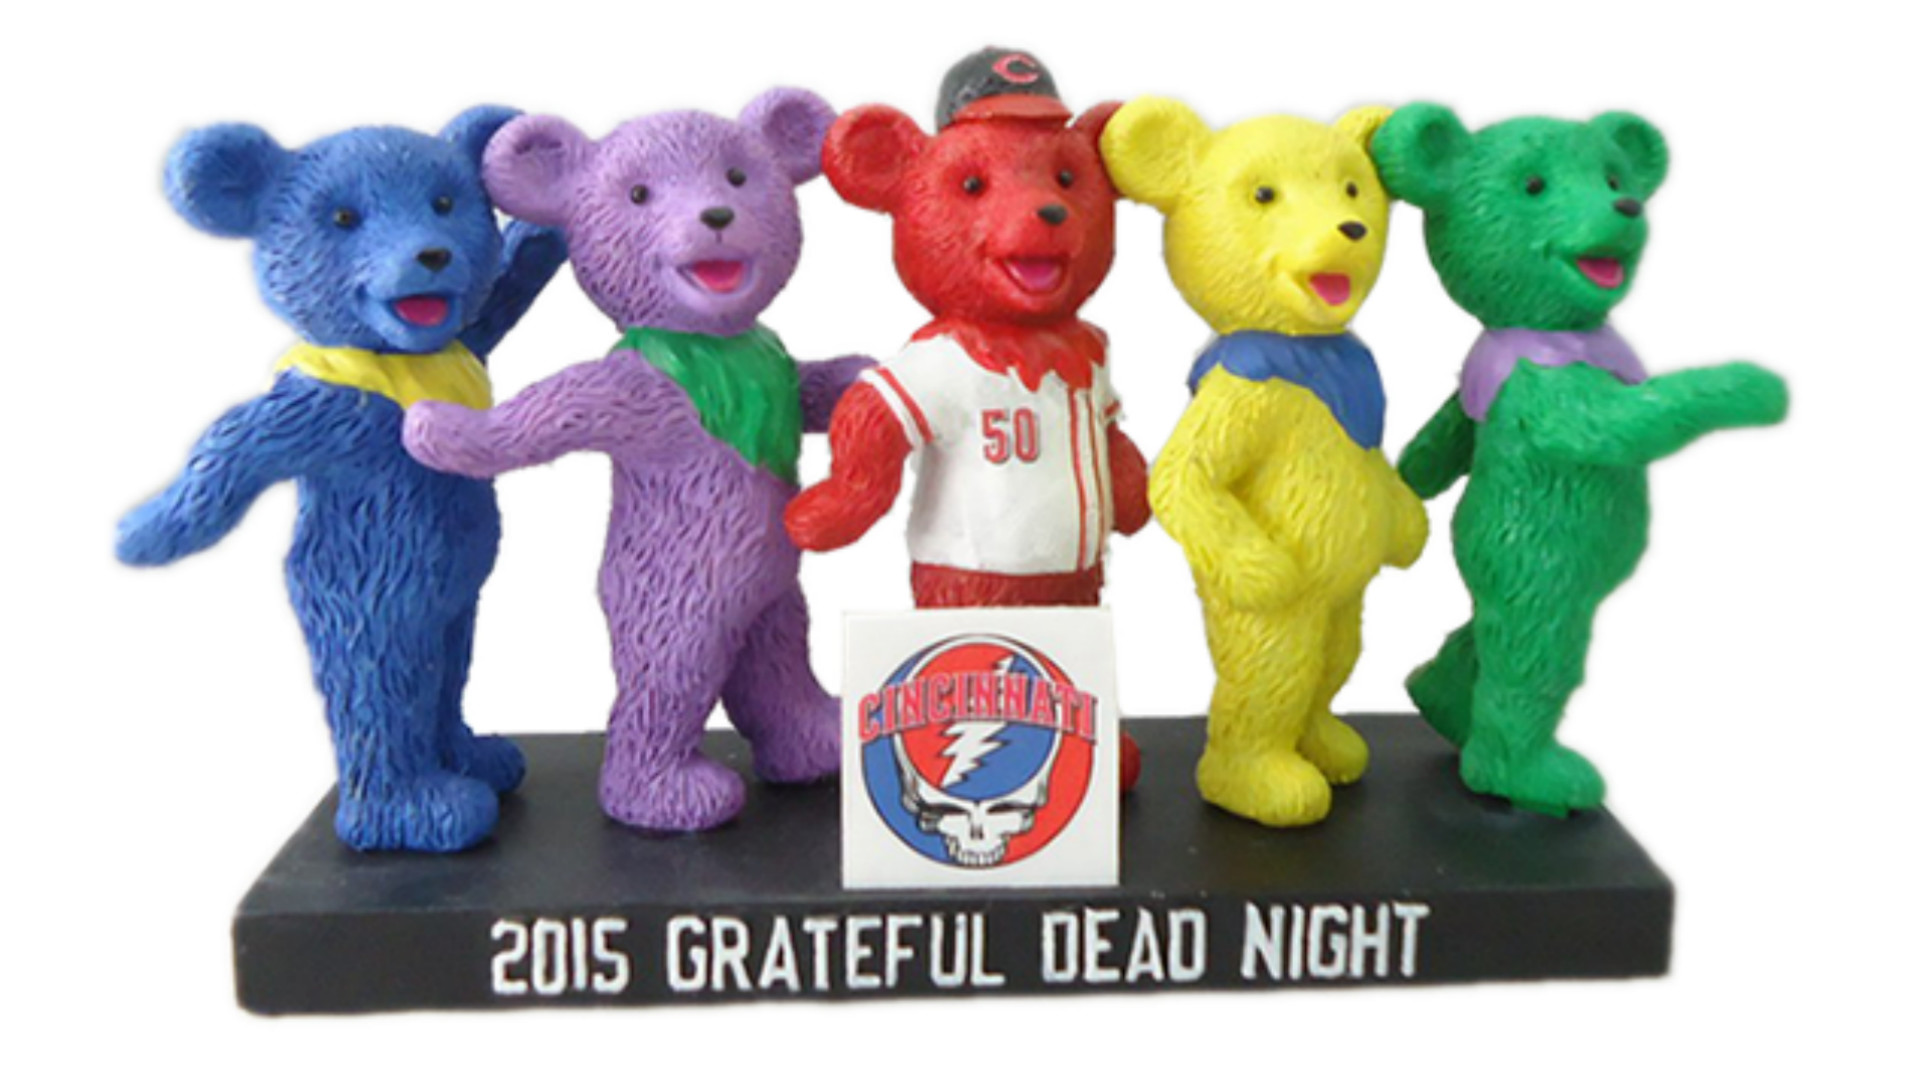 1920x1080 Reds to host Grateful Dead Night to celebrate band's 50th anniversary